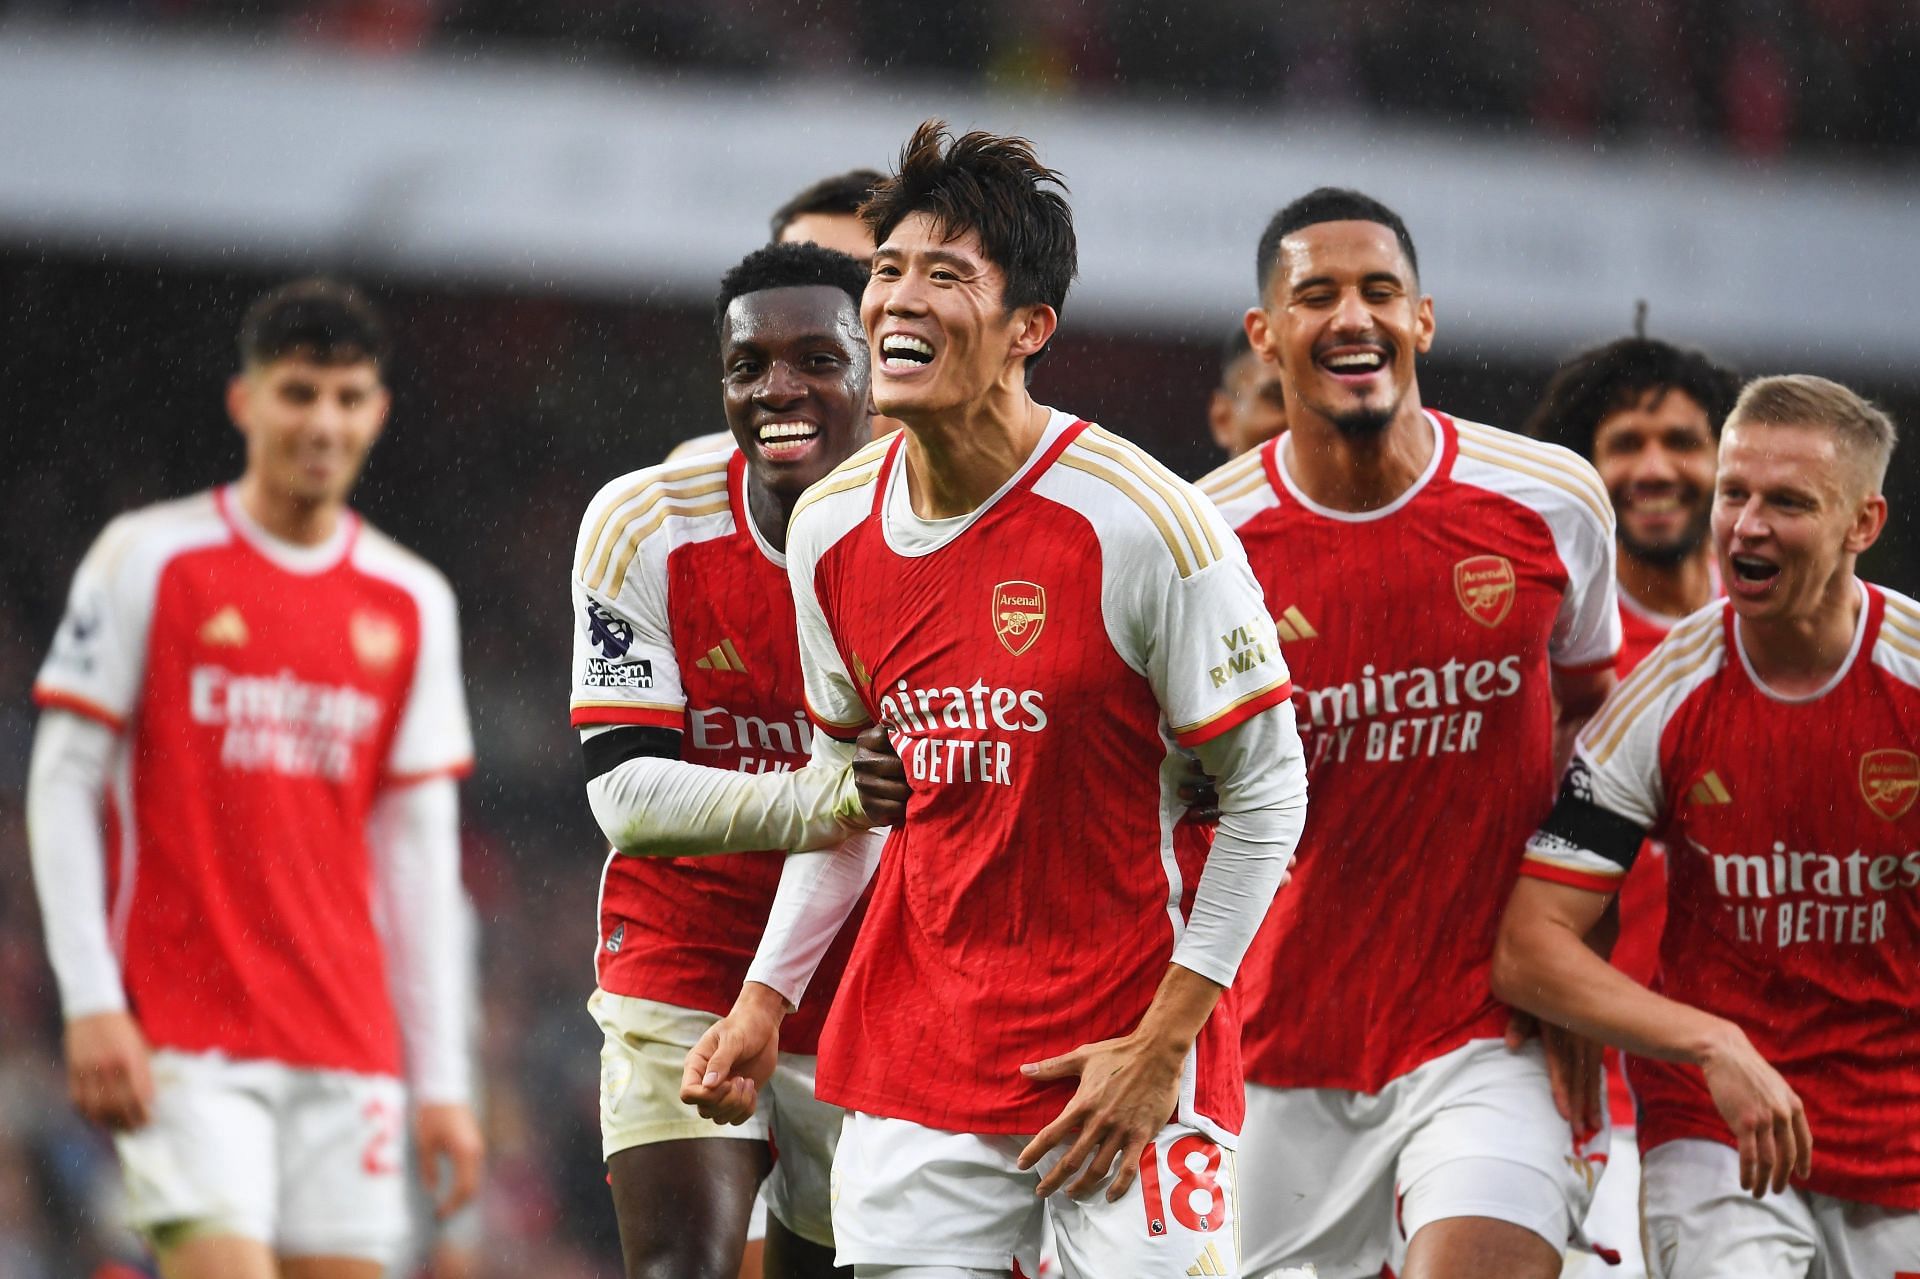 Arsenal put Sheffield United to the sword with a clinical performance at the Emirates